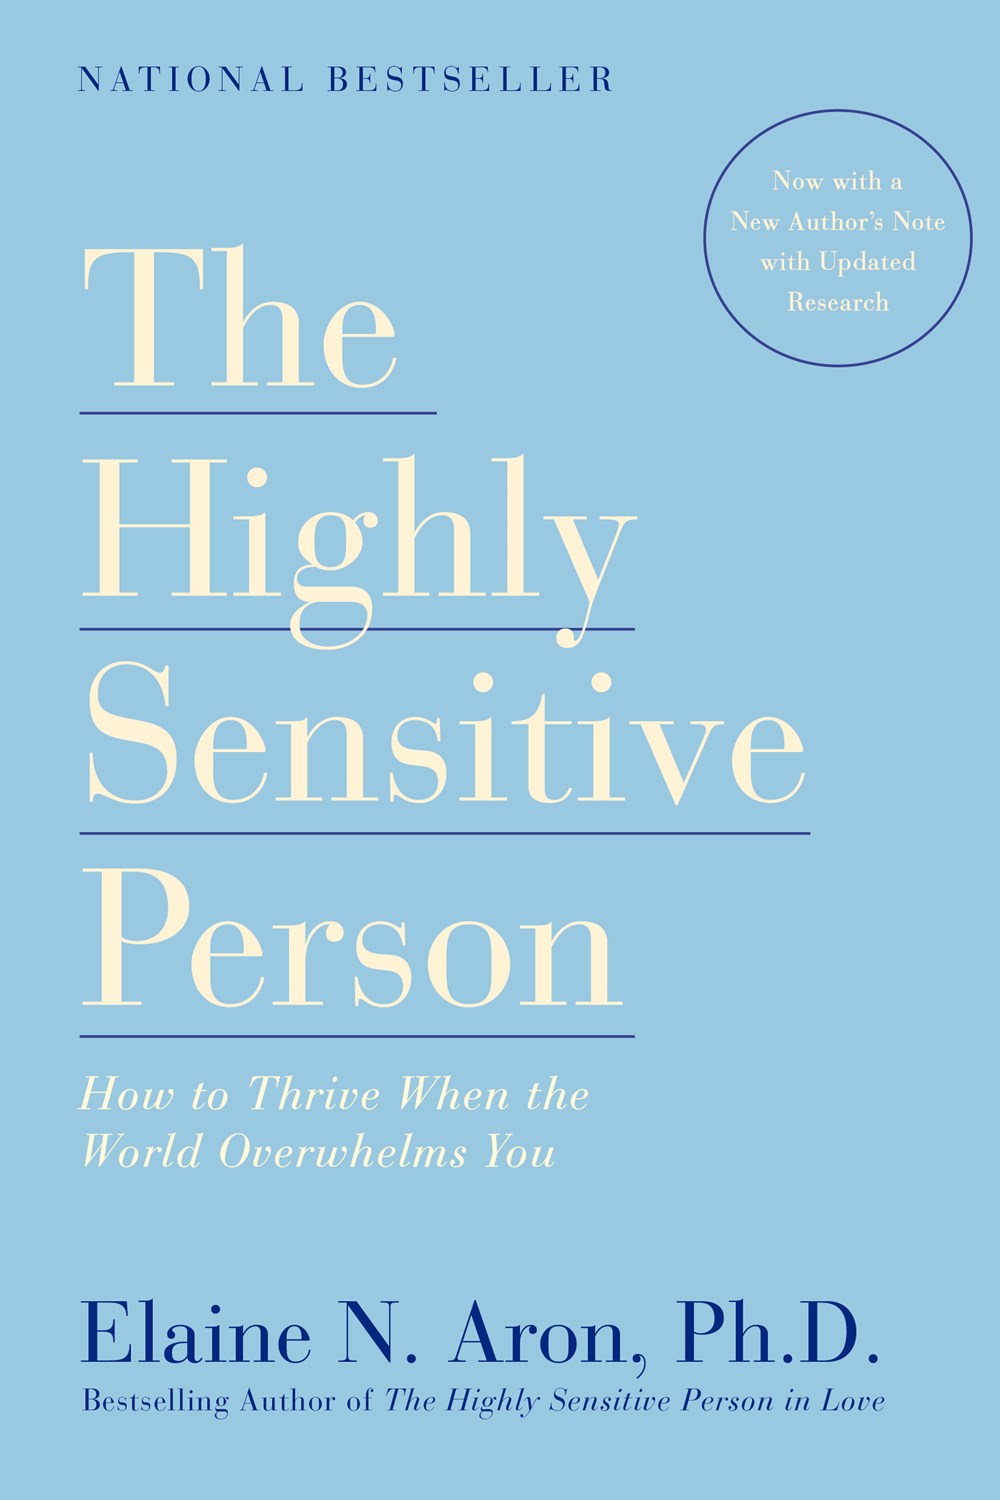 The Highly Sensitive Person : How to Thrive When the World Overwhelms You